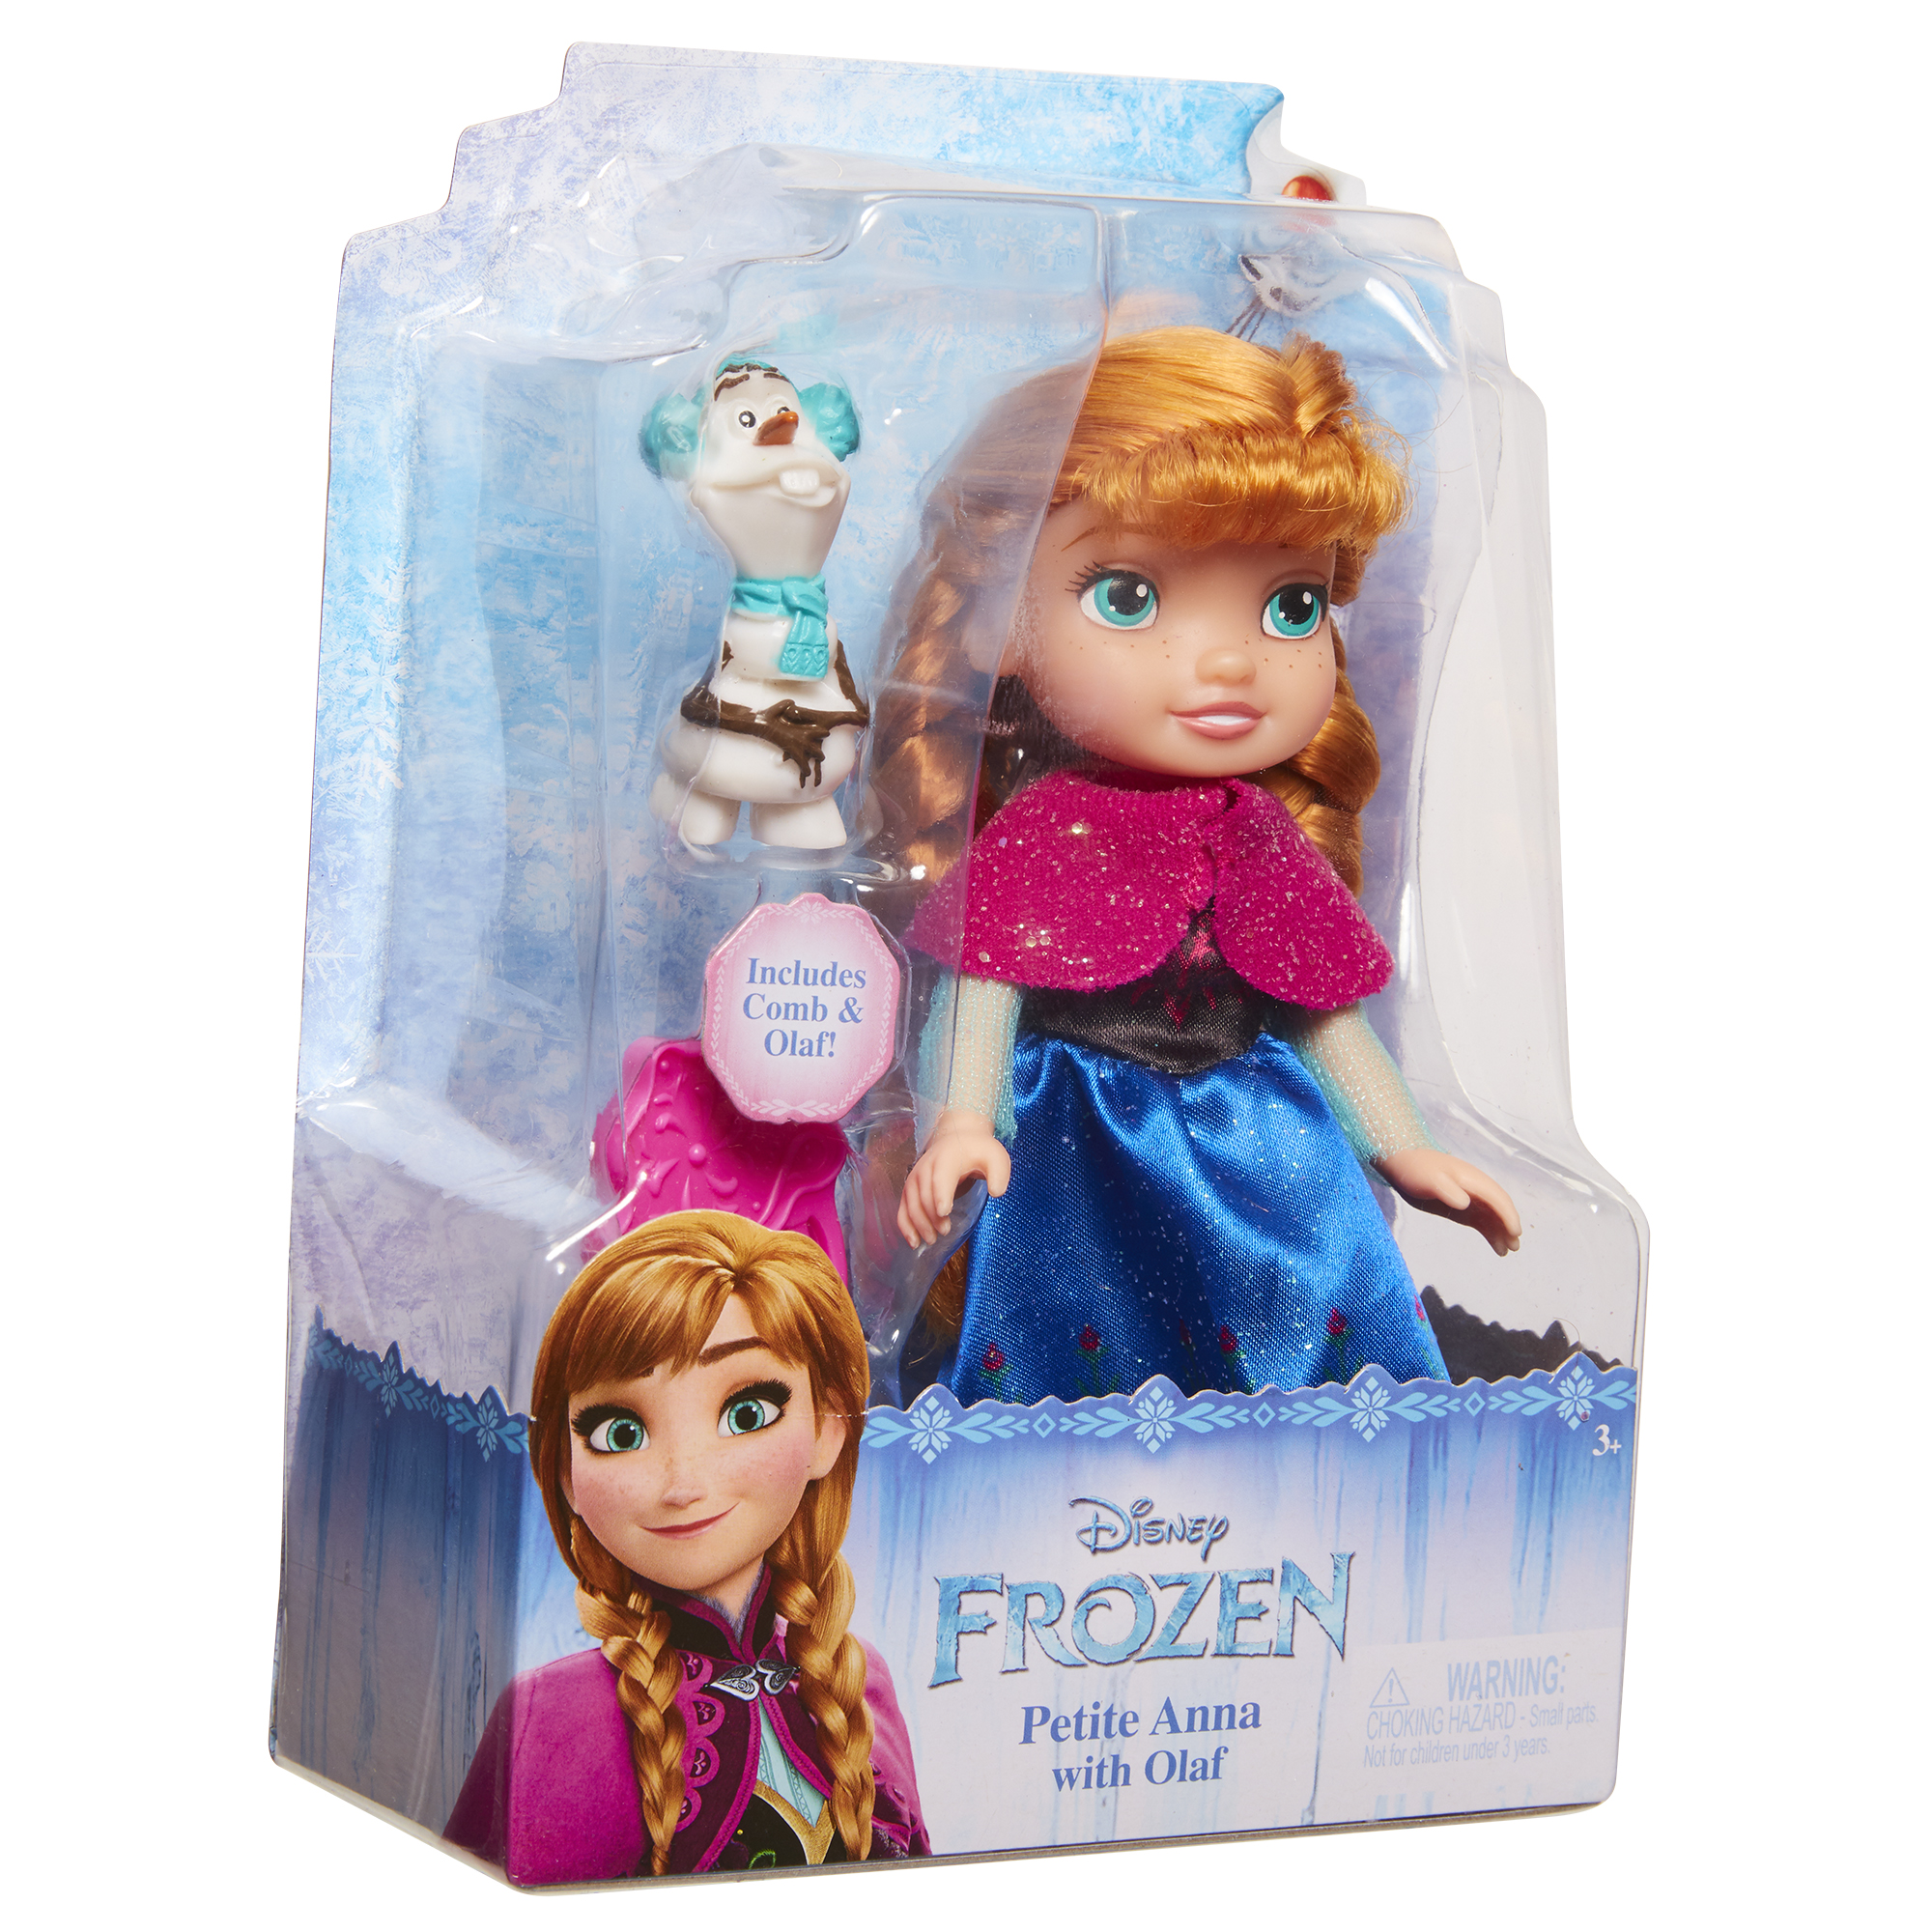 Disney Frozen Petite Anna Doll with Olaf - image 5 of 6